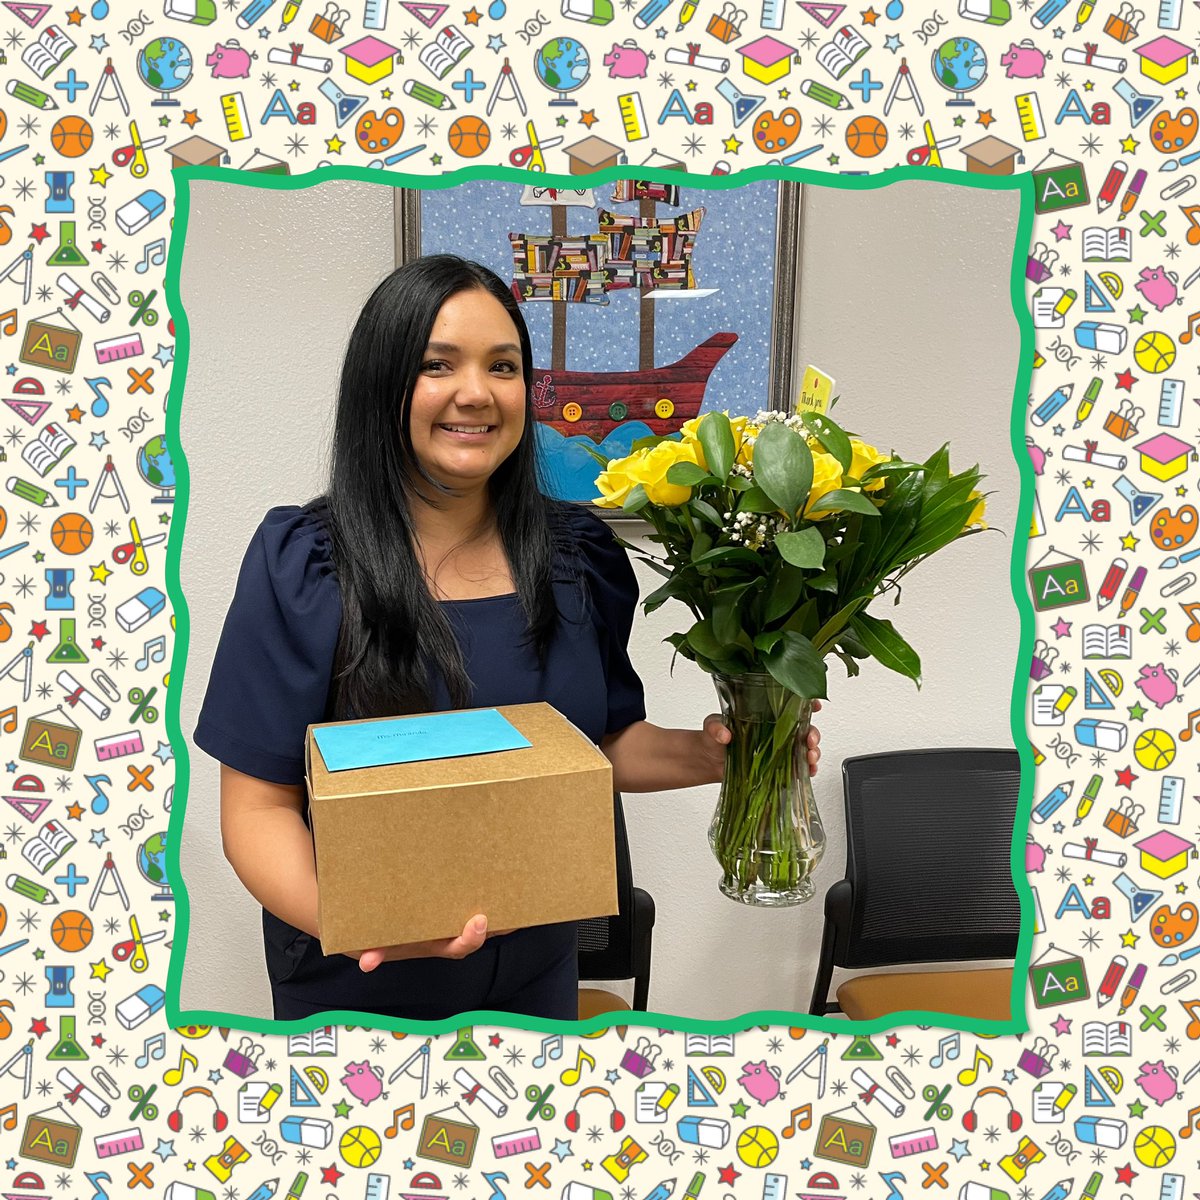 Happy National School Principal’s Day @MCooper_ES ! You make a difference in the lives of our Pirates and staff everyday! Thank you for leading with ❤️! #NationalPrincipalsDay #AnchoredInLearning⚓️💙 #TeamSISD